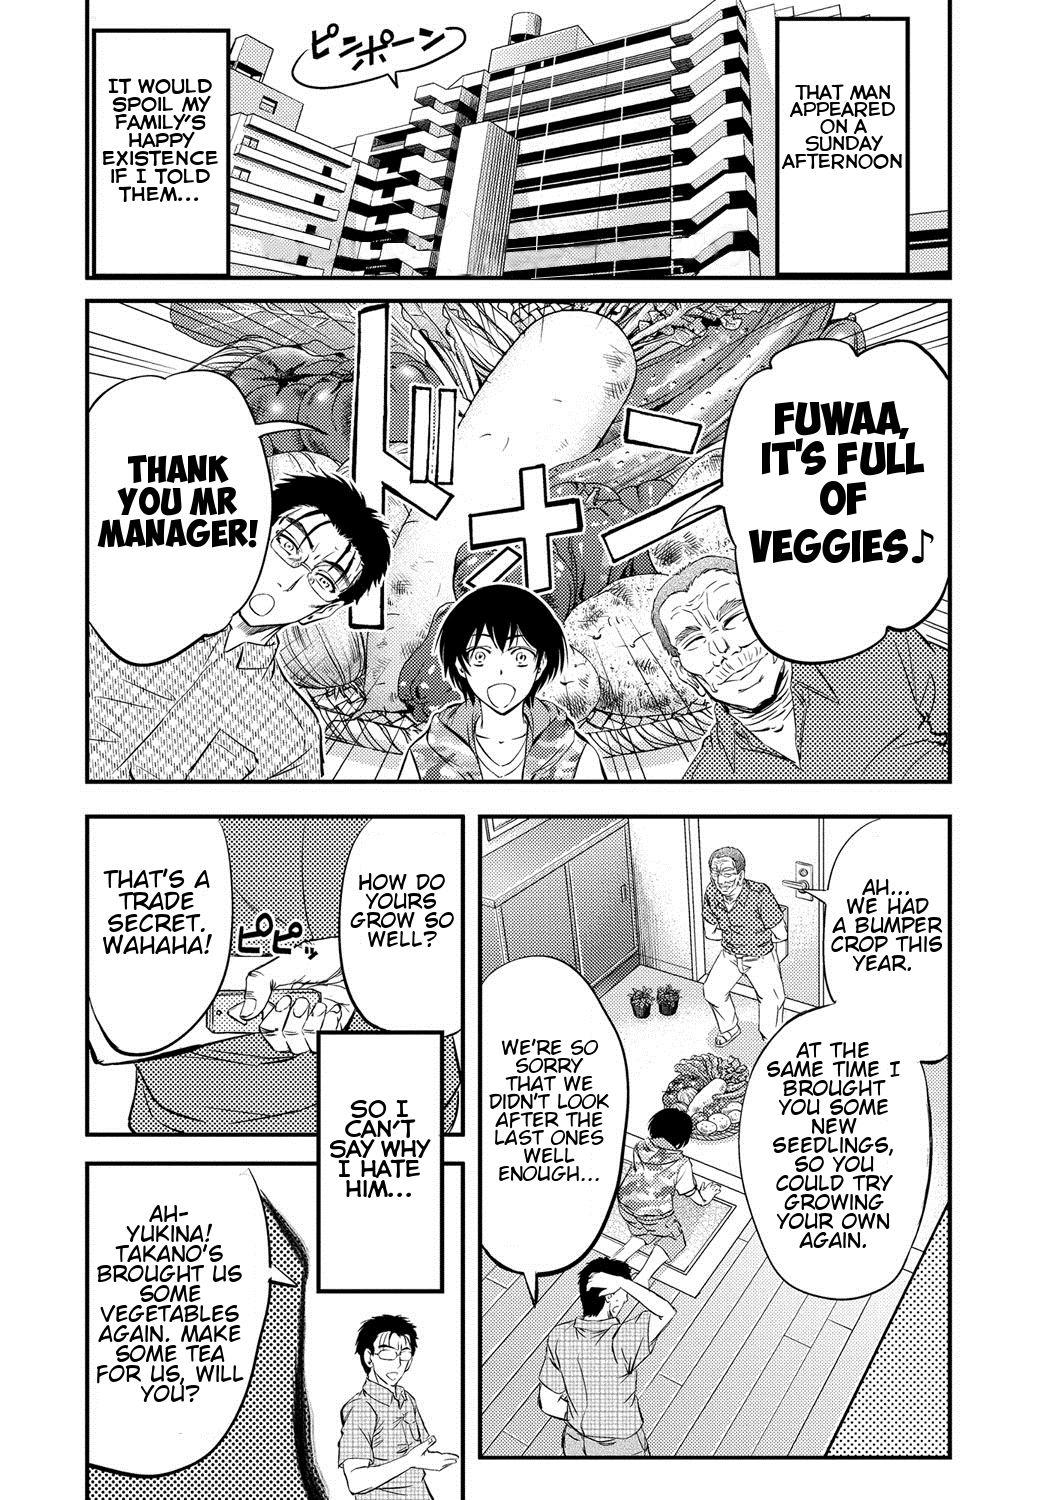 Pick Up Oishii Yasai no Tsukurikata | The Recipe for Delicious Vegetables Gays - Page 2